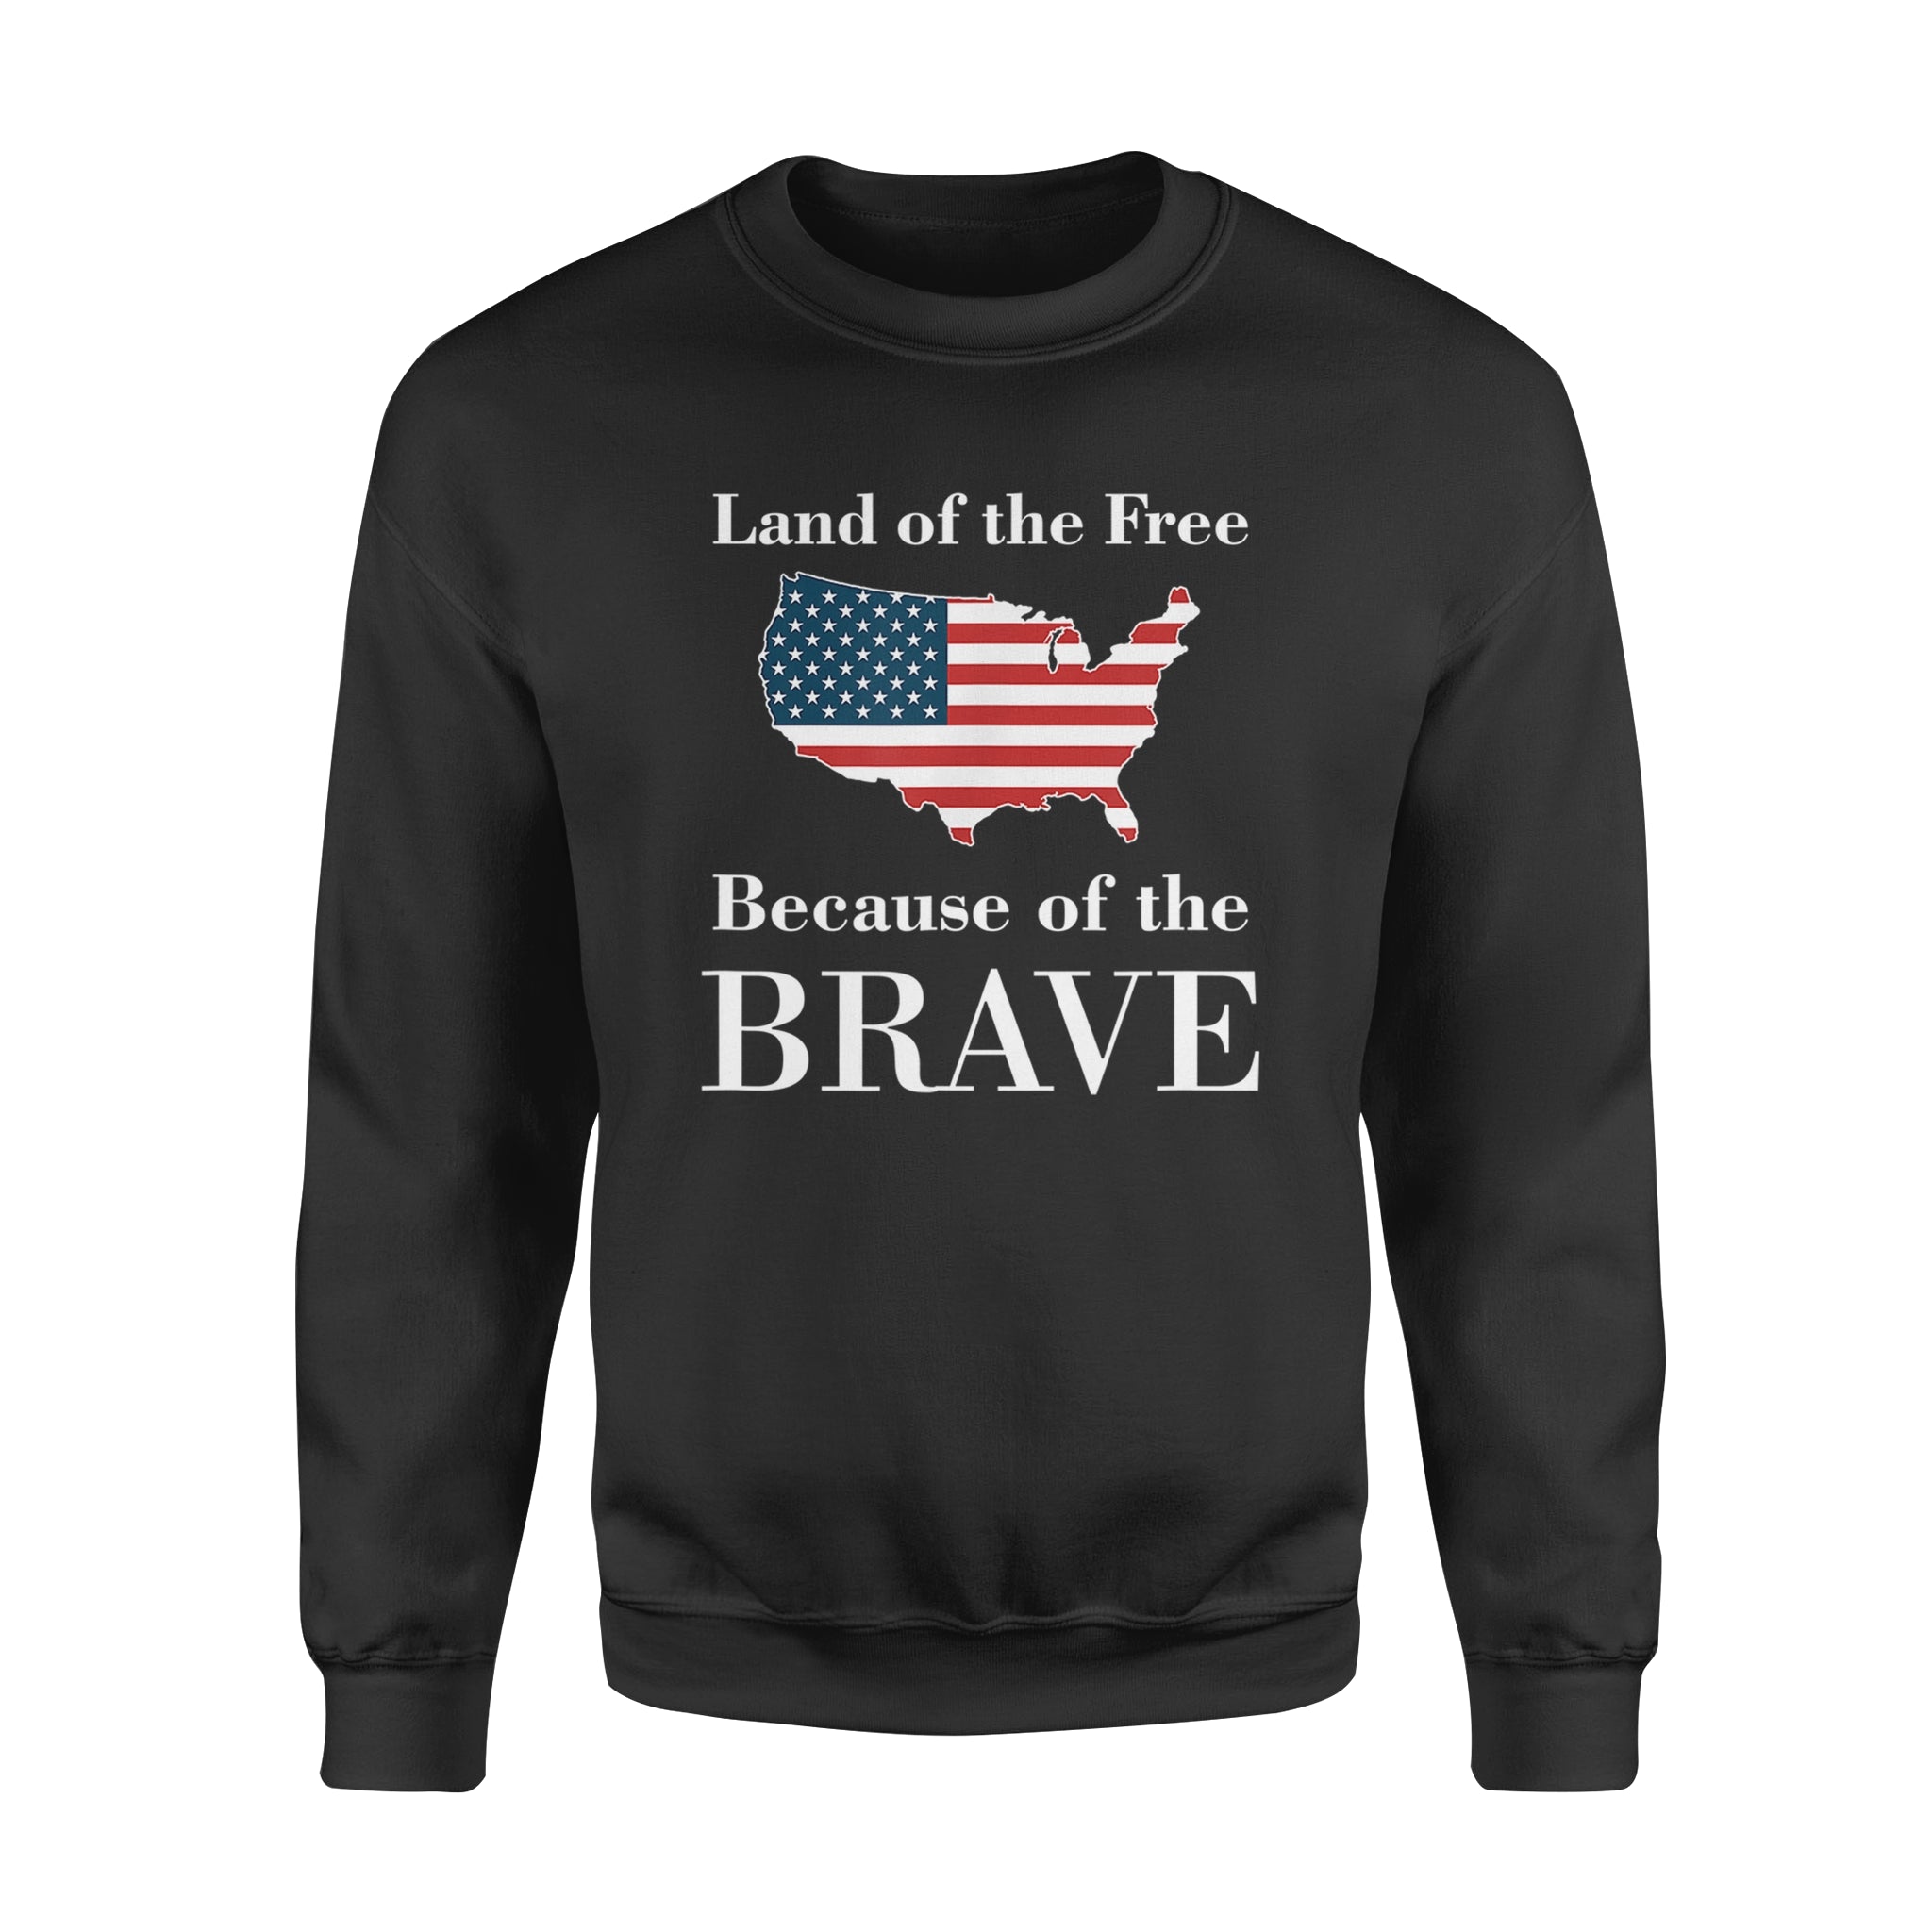 Land of the Free Because of the Brave - Standard Crew Neck Sweatshirt